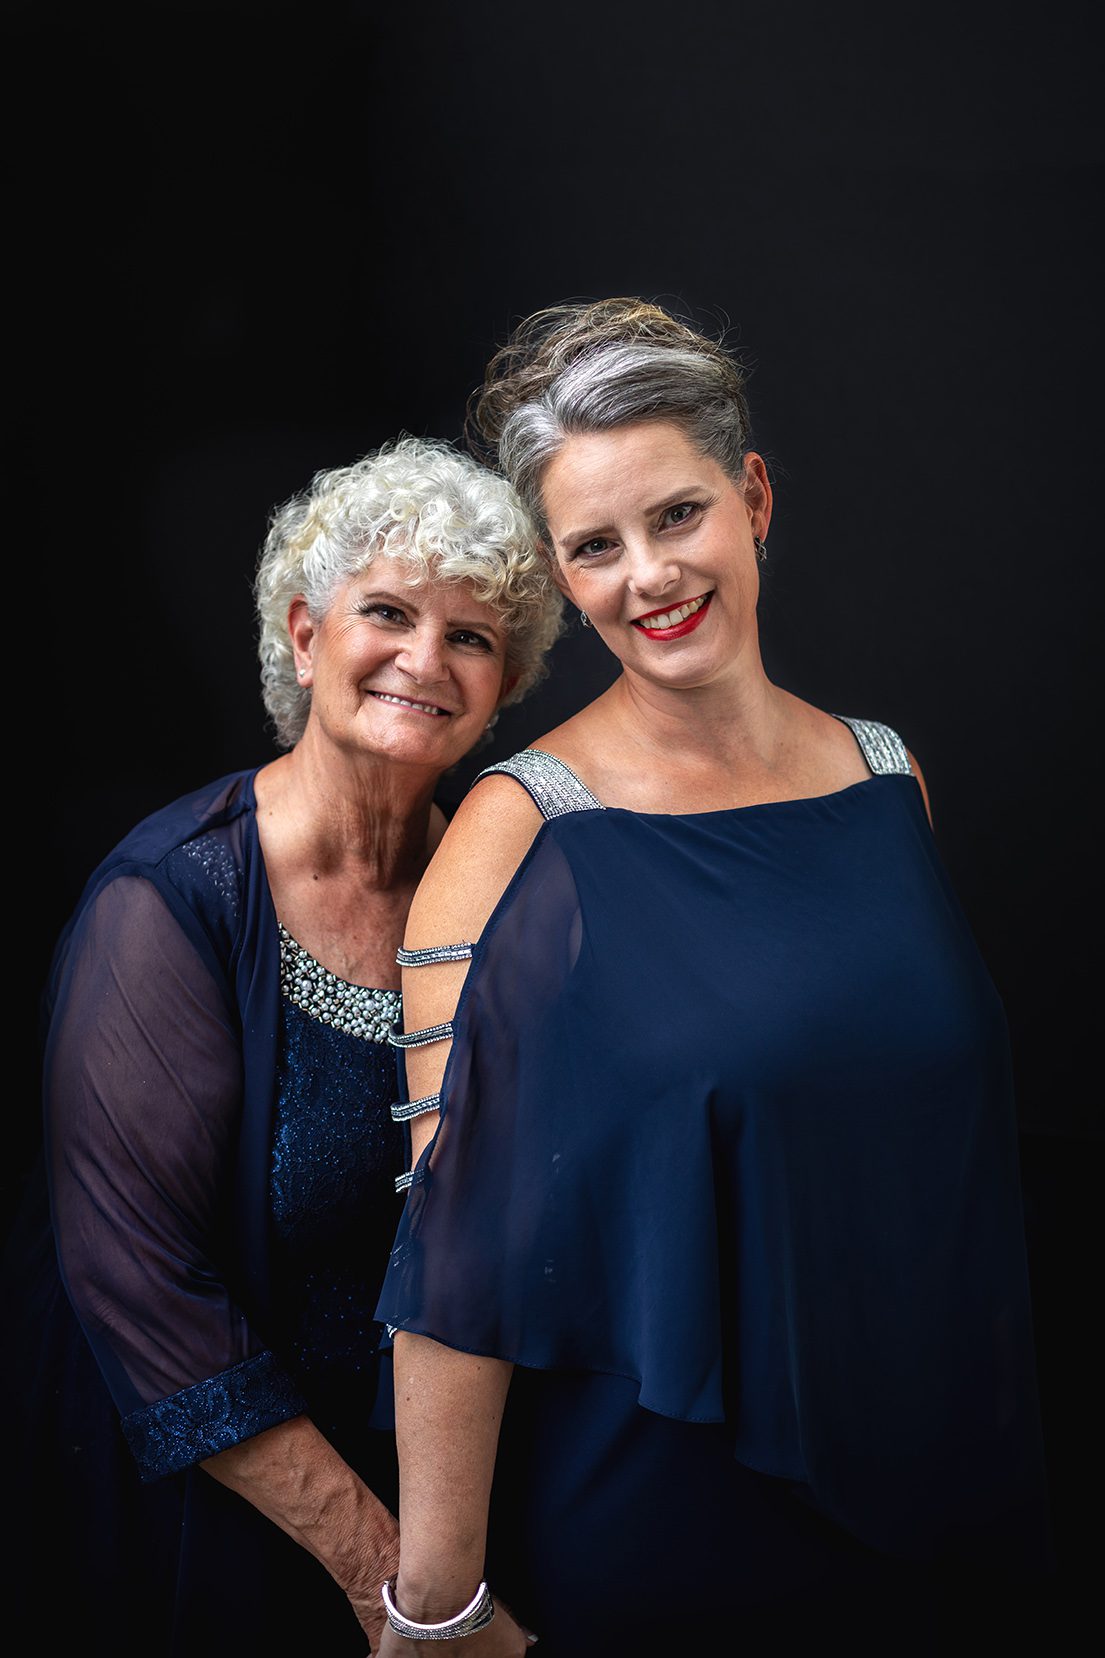 Over 50 mother and daughter studio portrait wearing blue dress with grey hair by Juniper Lynne Photography in Port Orchard Washington